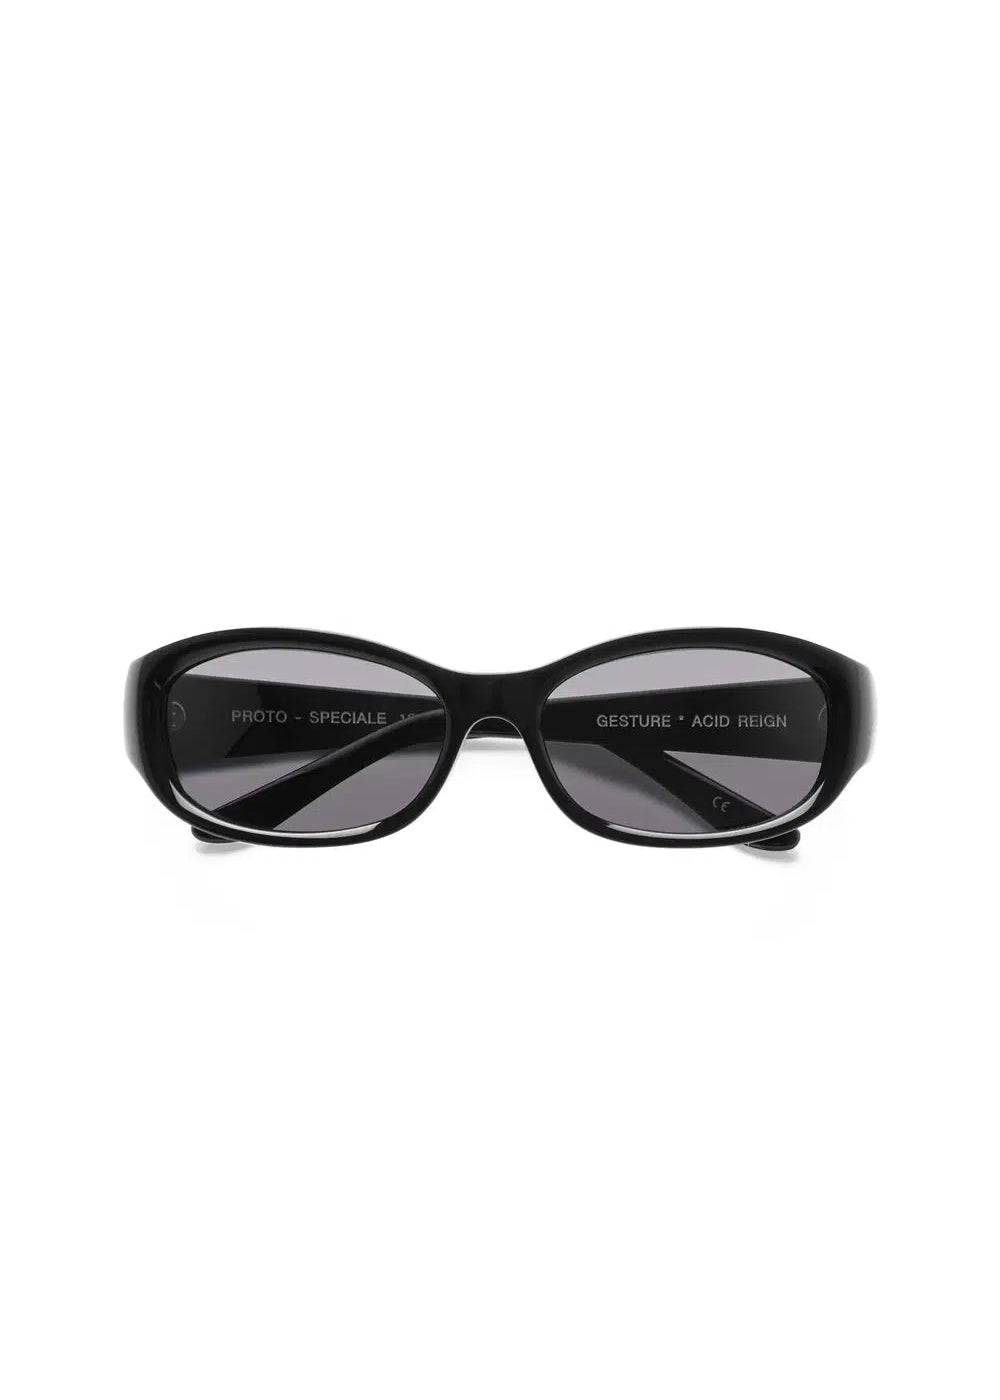 Proto Speciale 190 - Black / Smoke | GESTURE EYEWEAR | Mad About The Boy